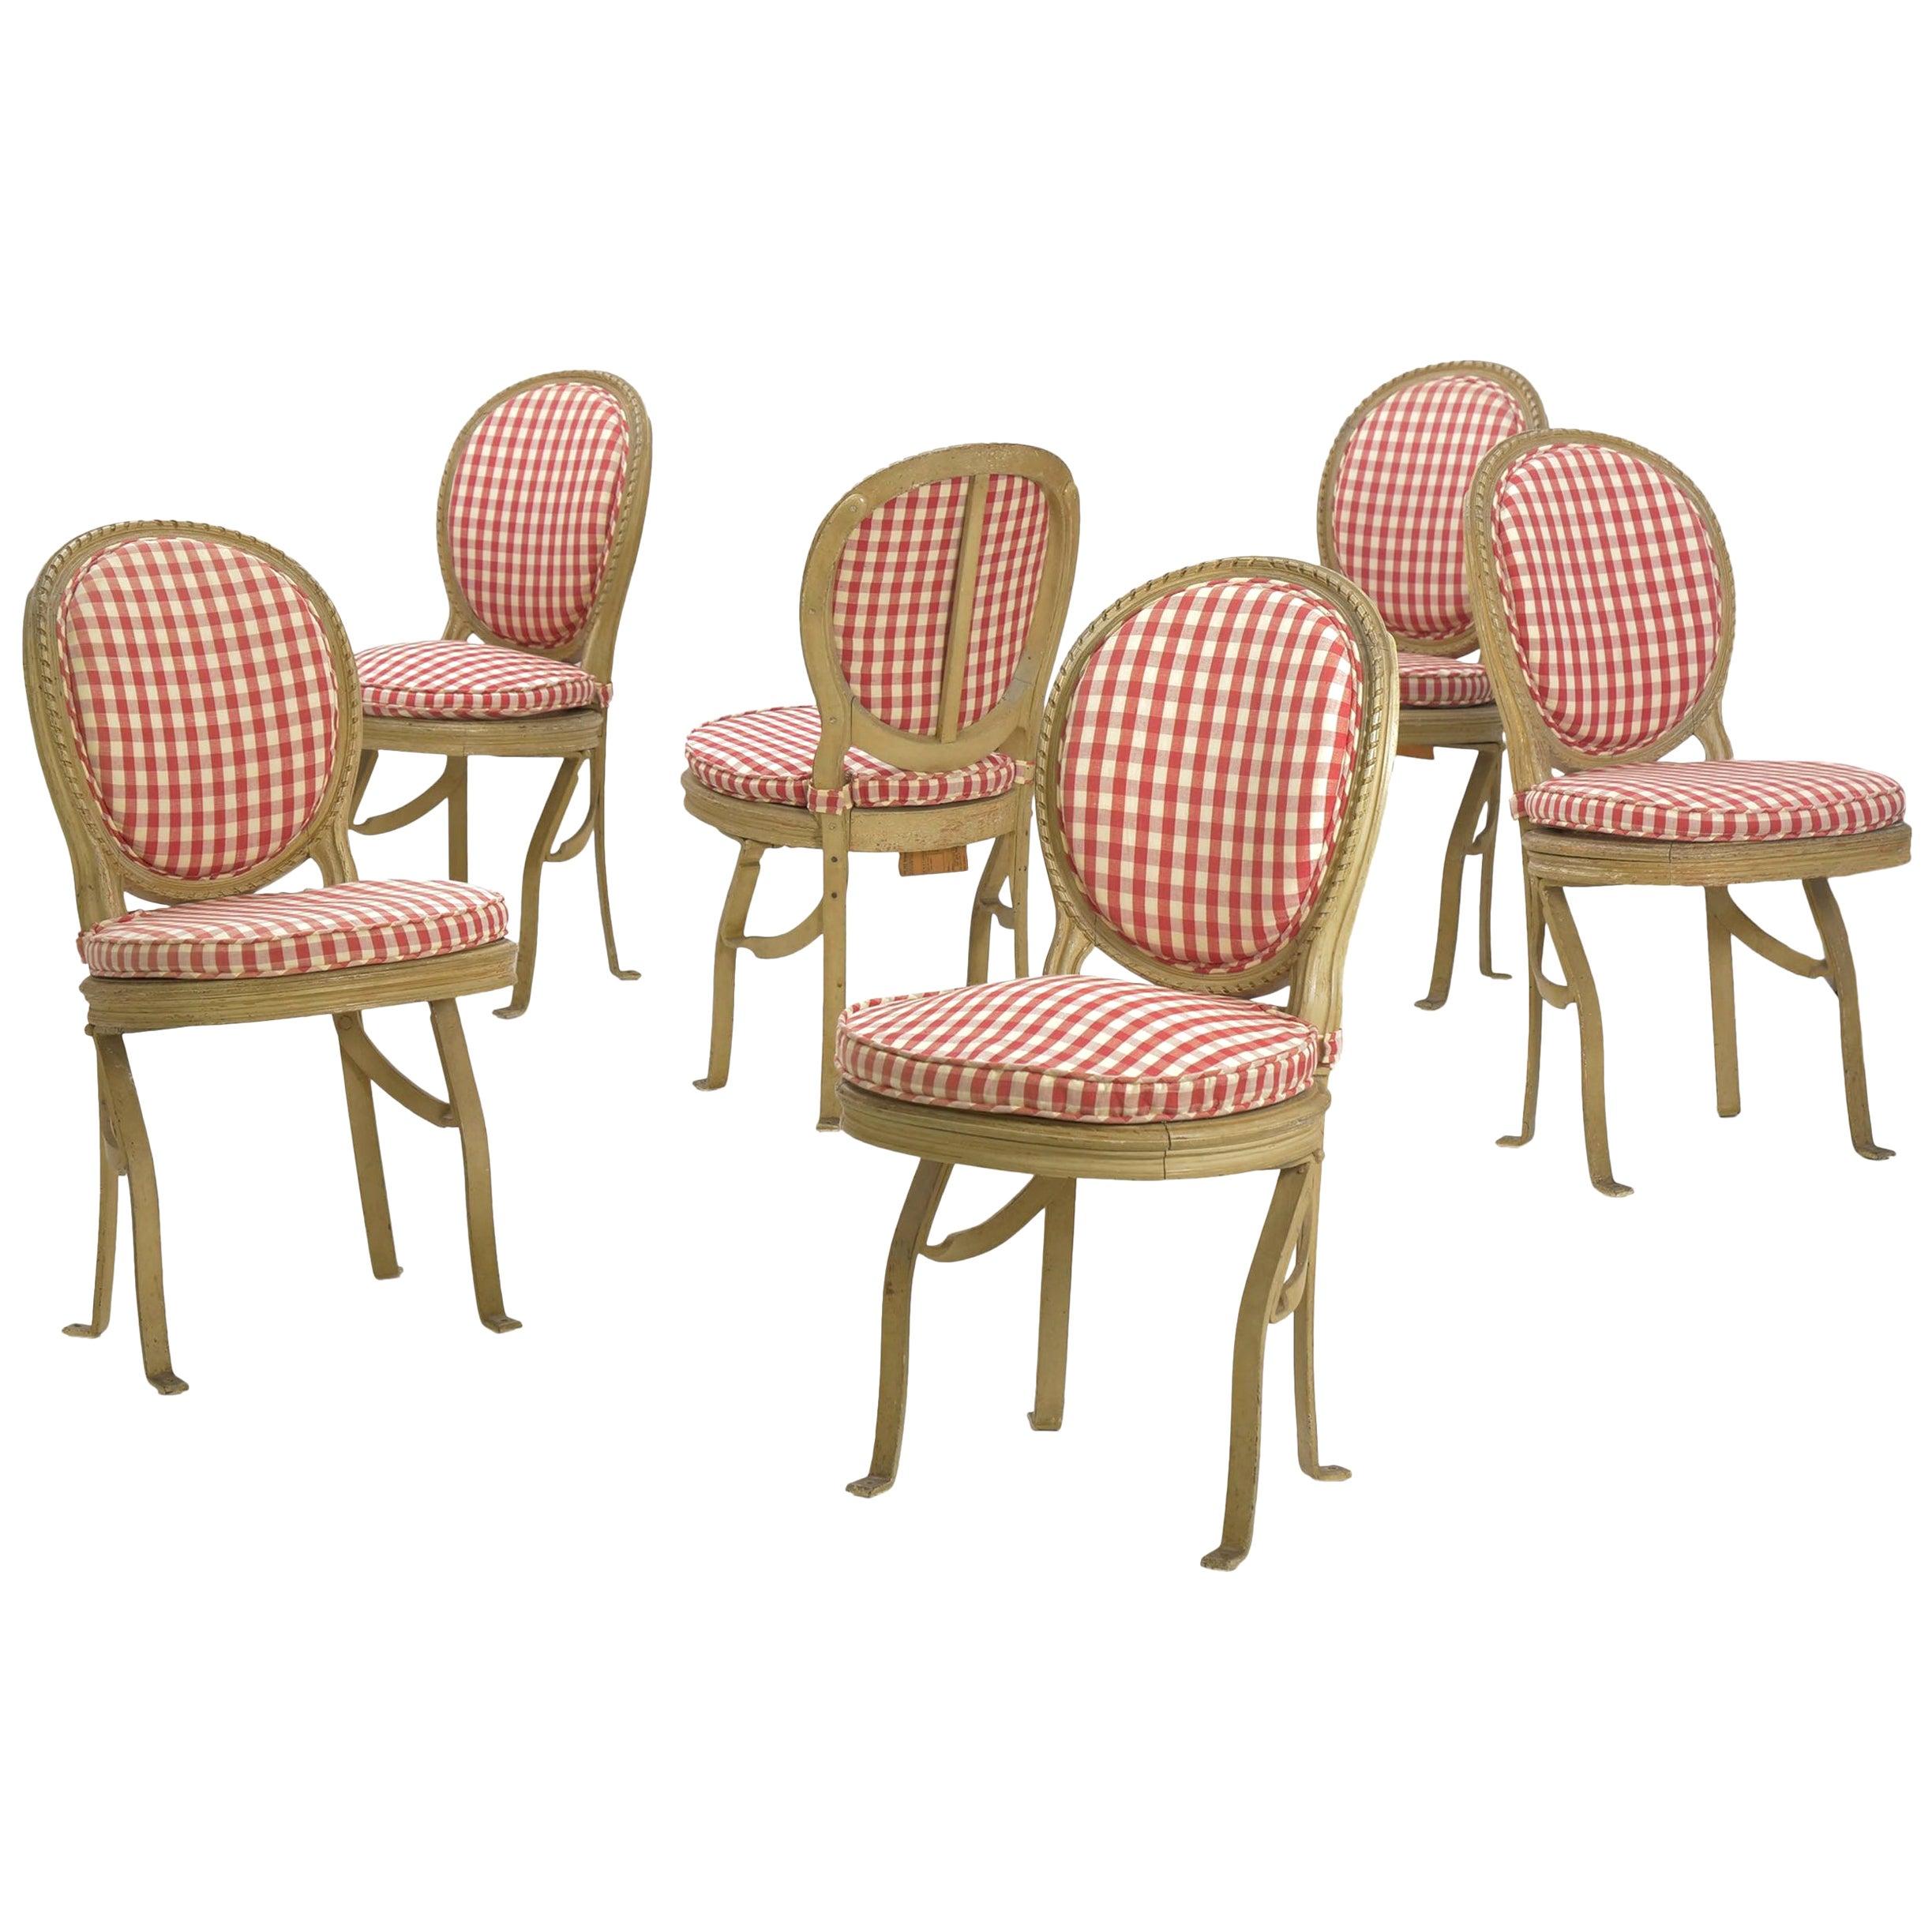 French Belle Époque Painted Theater Seats Dining Chairs, circa 1890, Set of 6